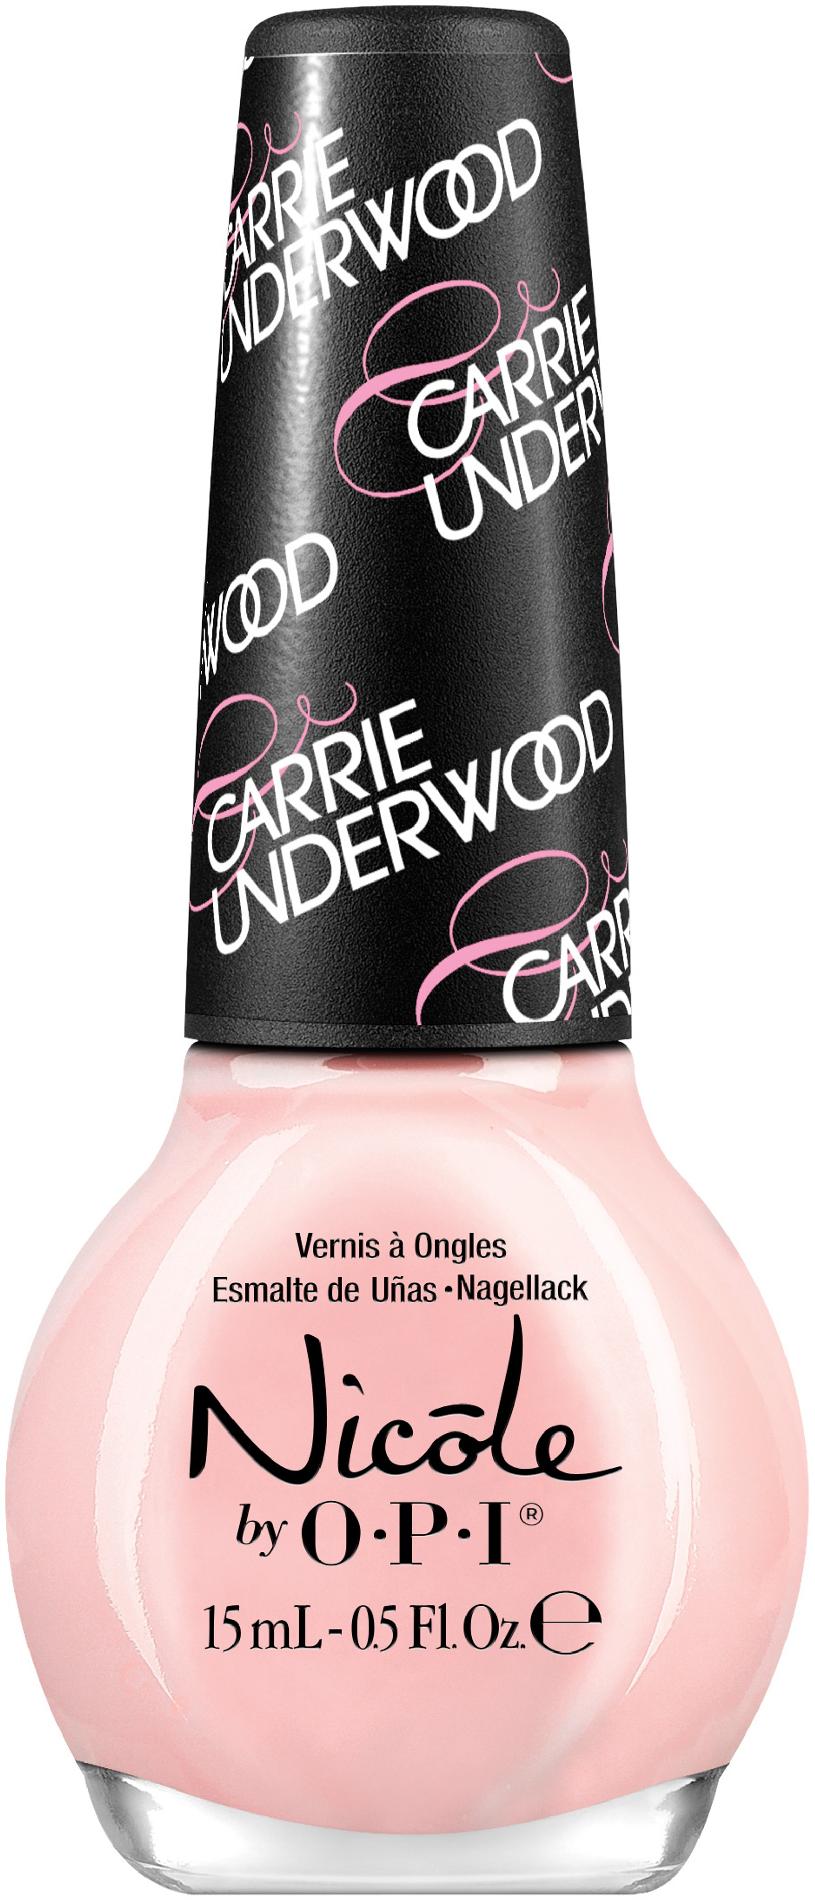 Carrie Underwood, Nail Lacquers, Love My Pups, 0.5 fl oz.